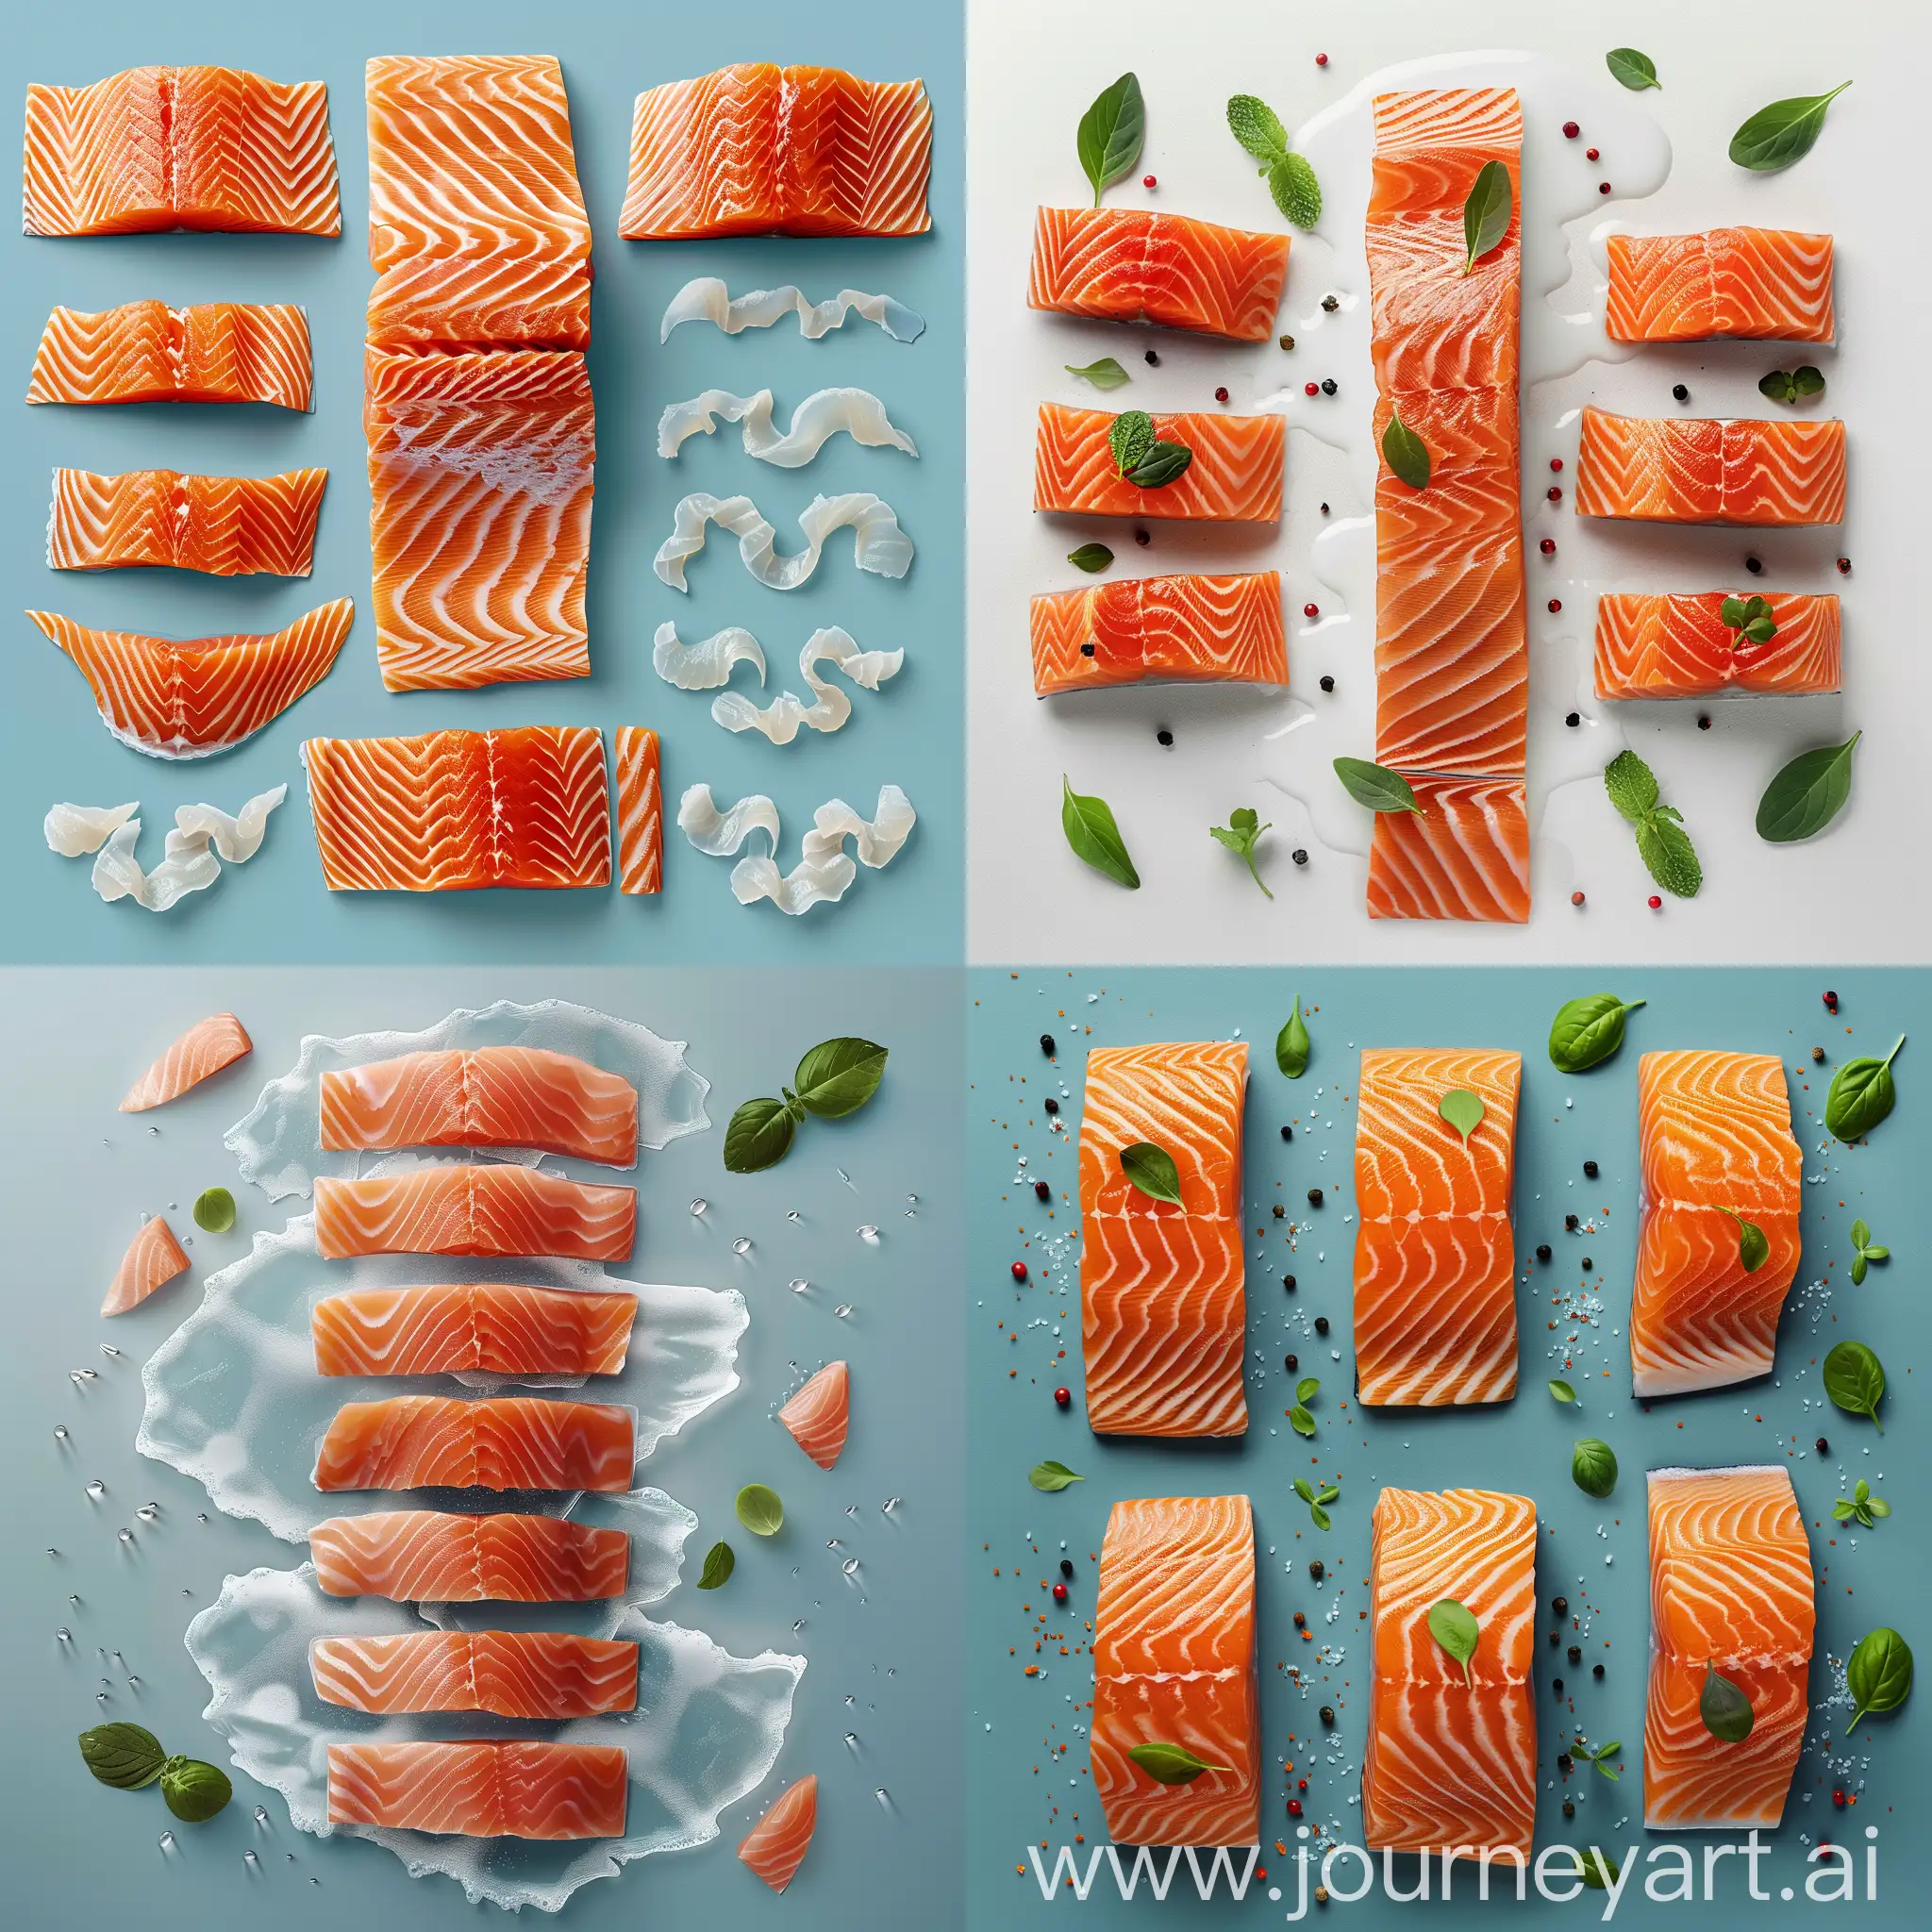 HighQuality-Salmon-Slices-Arranged-in-Wave-Patterns-Top-View-Packaging-Design